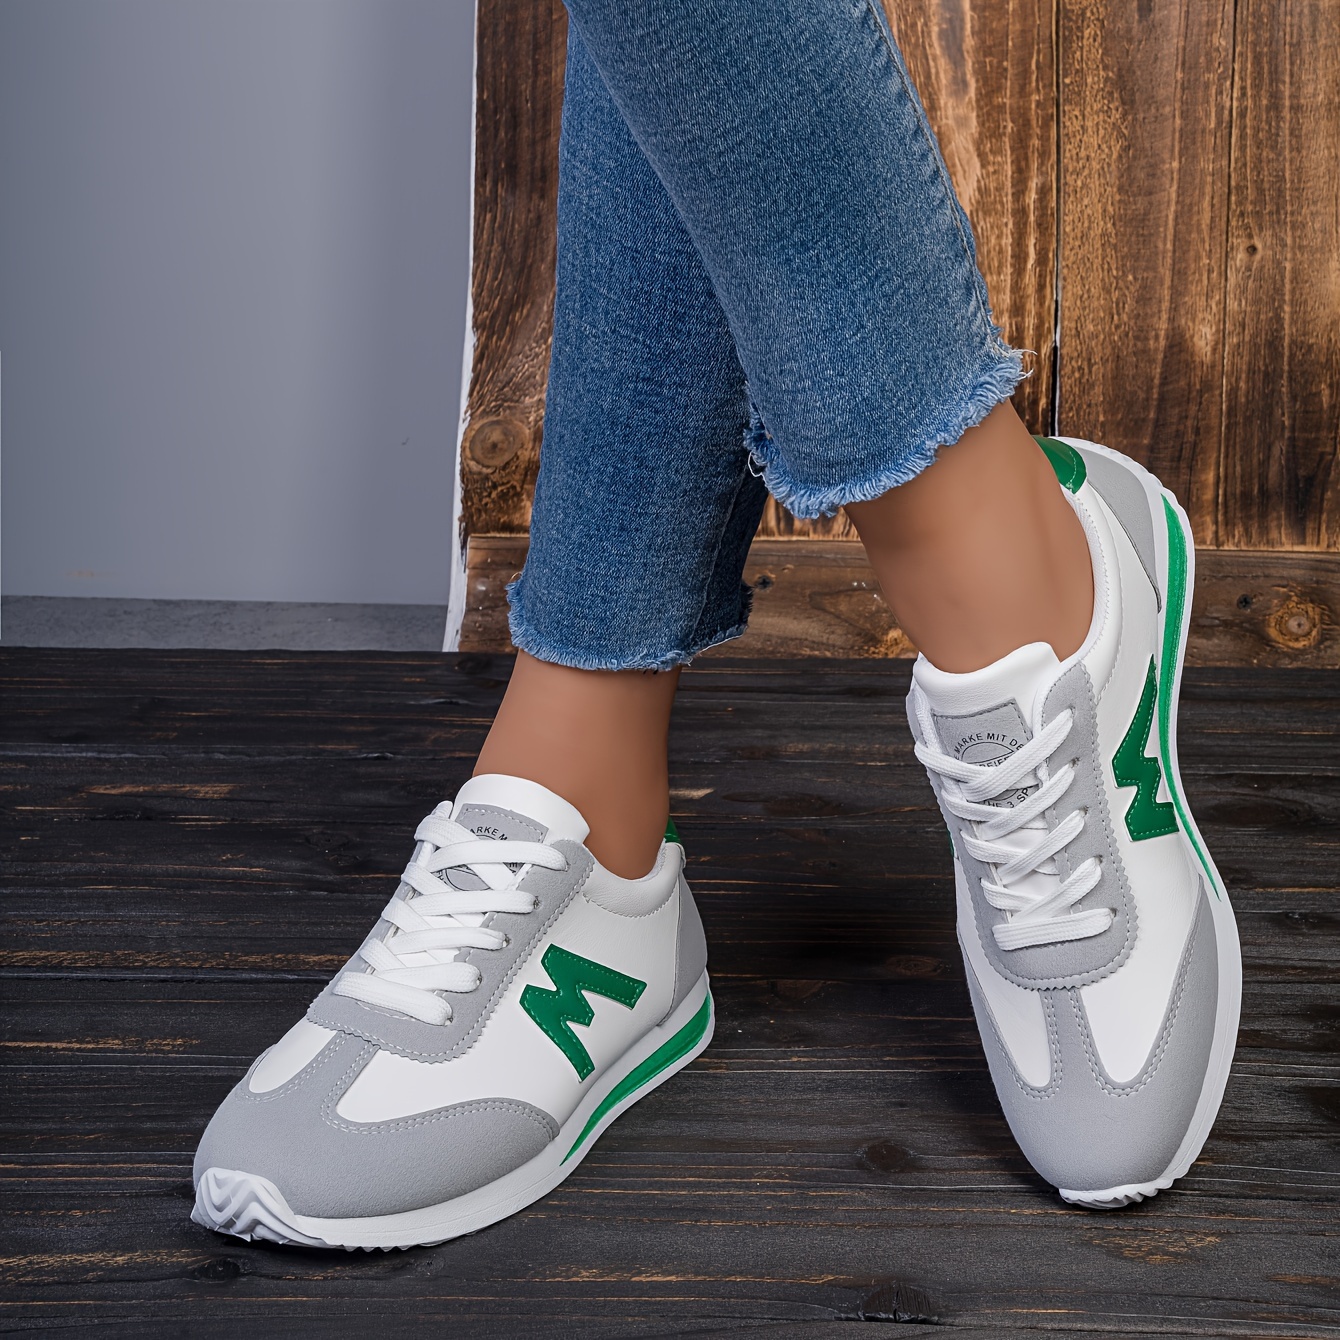 womens colorblock casual sneakers lace up soft sole platform walking shoes lightweight low top running shoes details 3